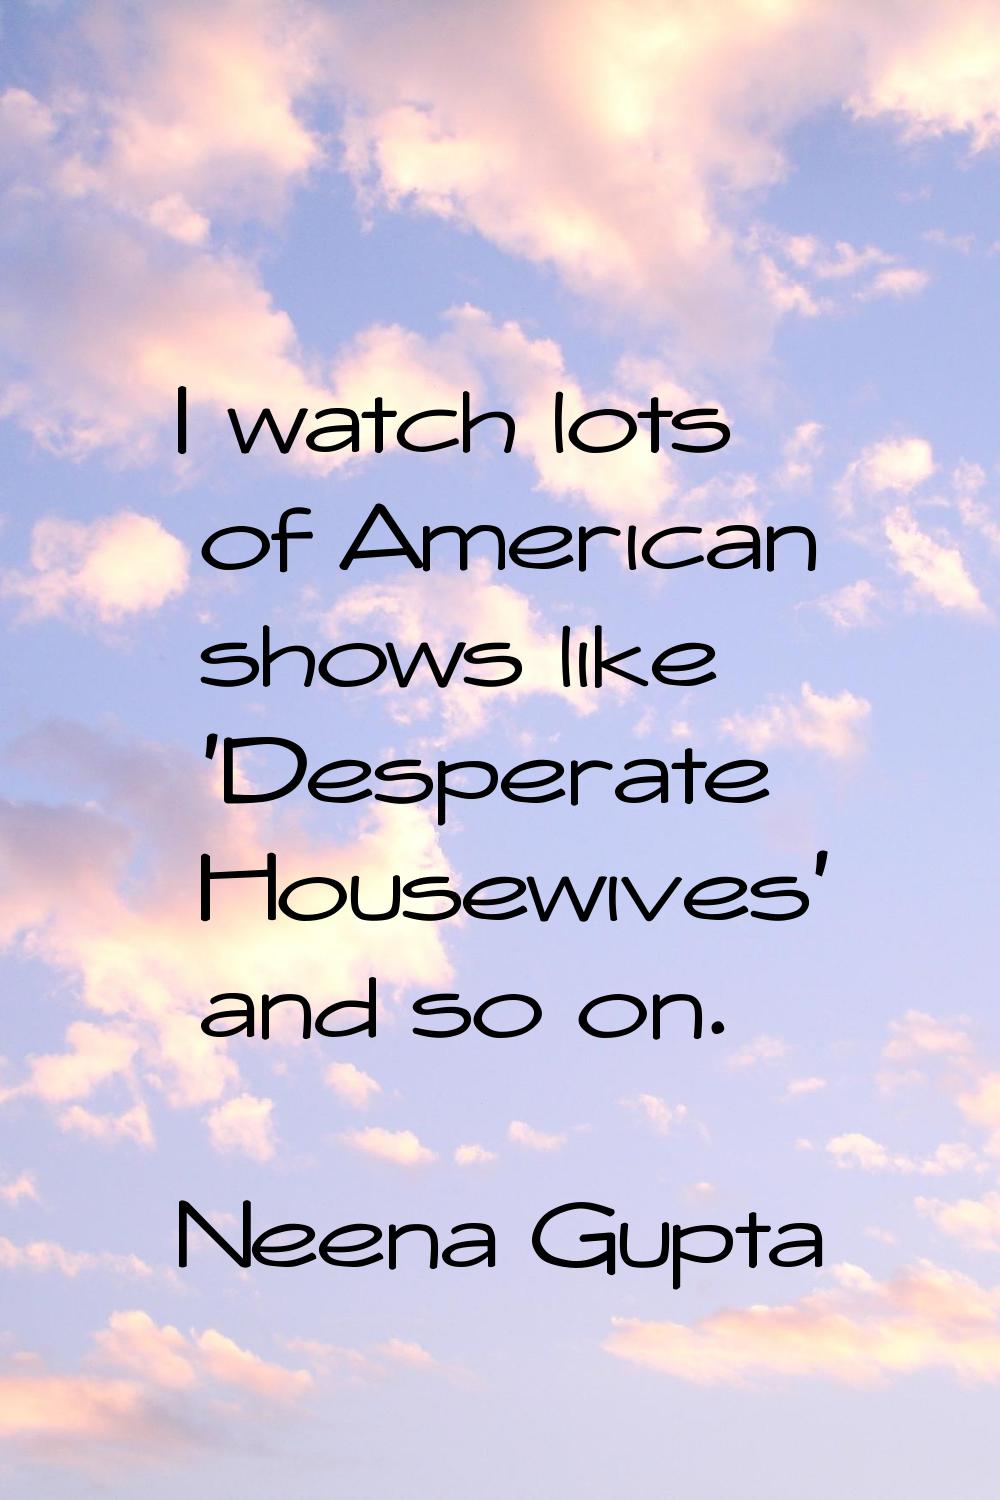 I watch lots of American shows like 'Desperate Housewives' and so on.